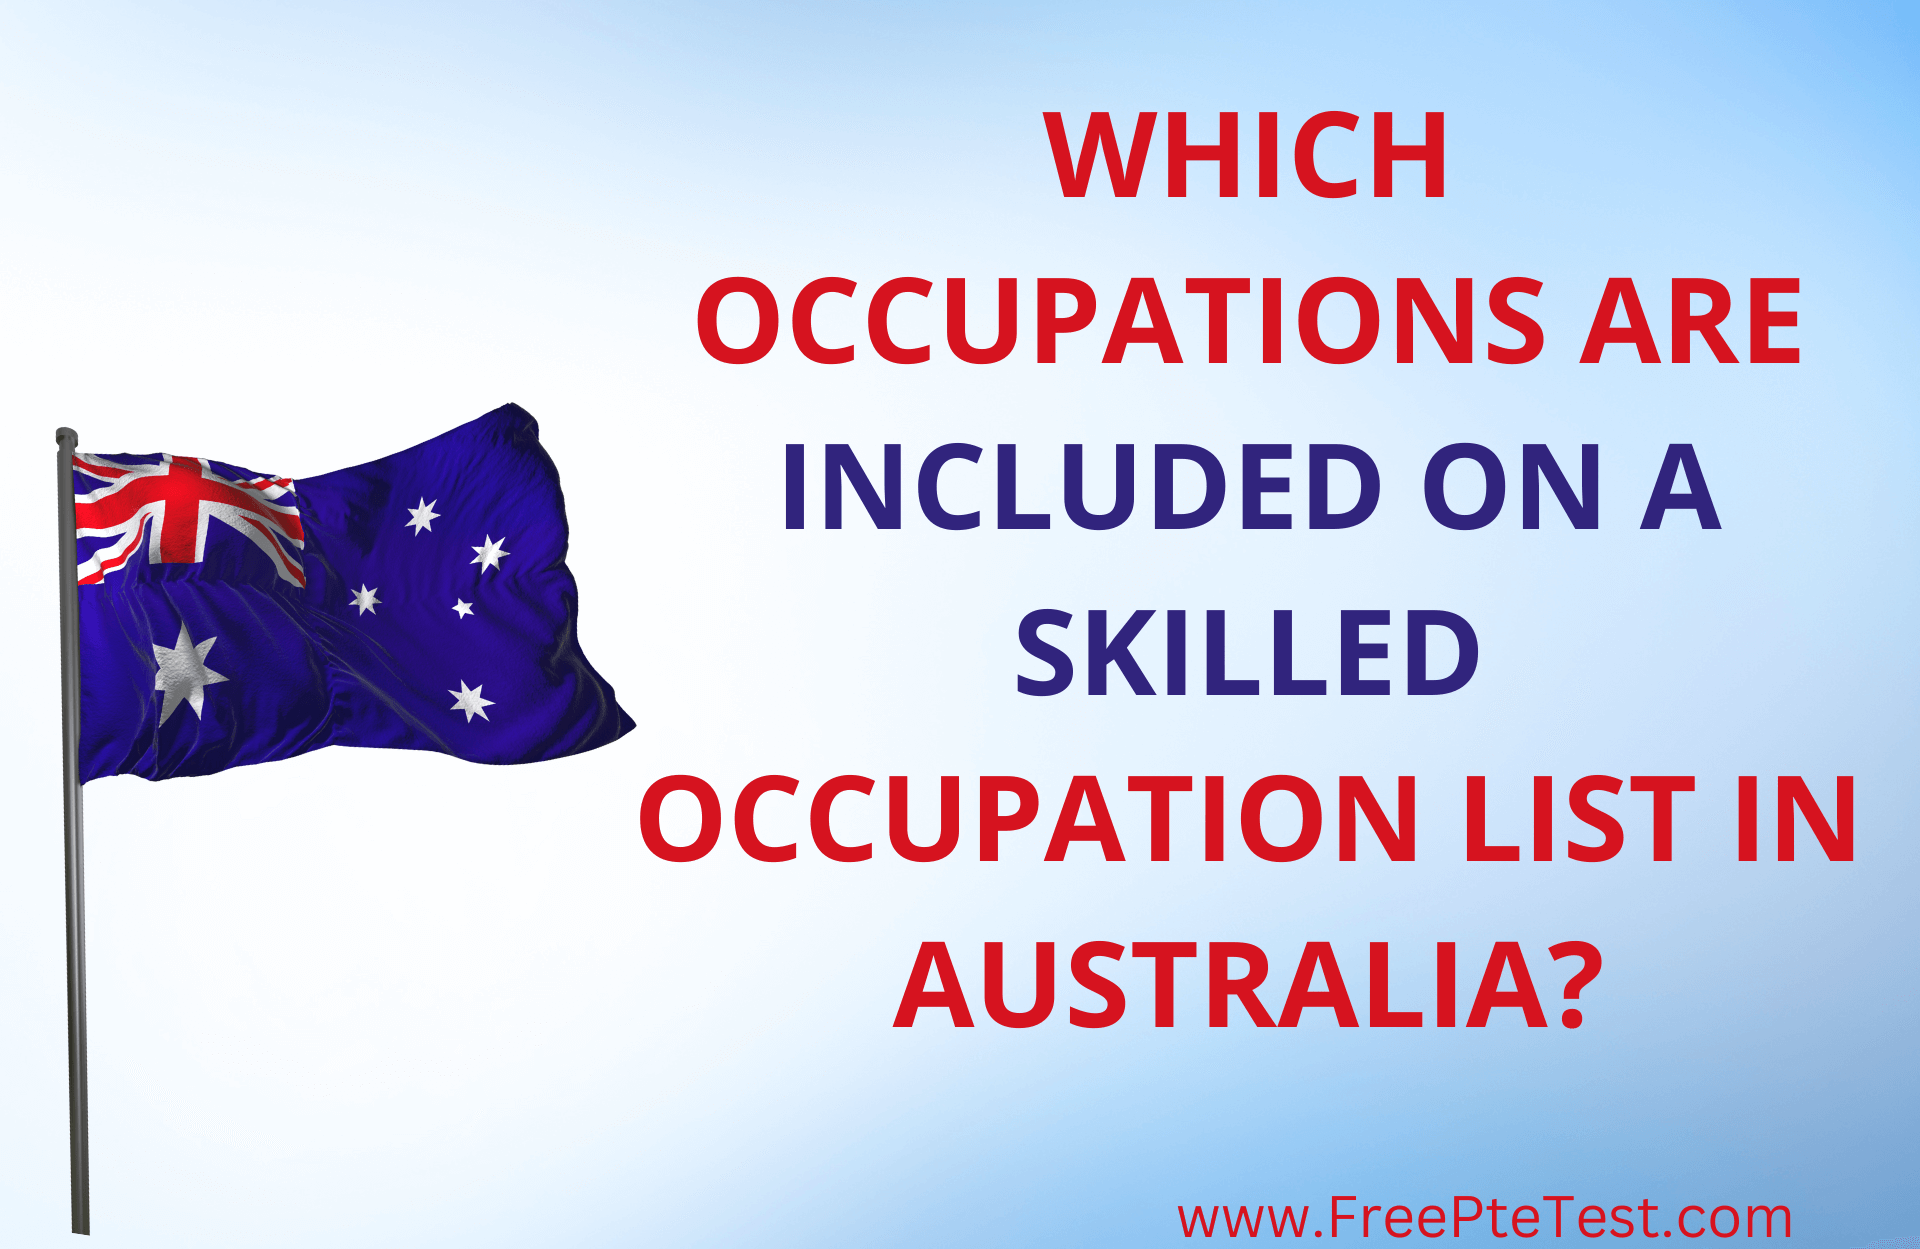 You are currently viewing Which occupations are included on a Skilled Occupation List